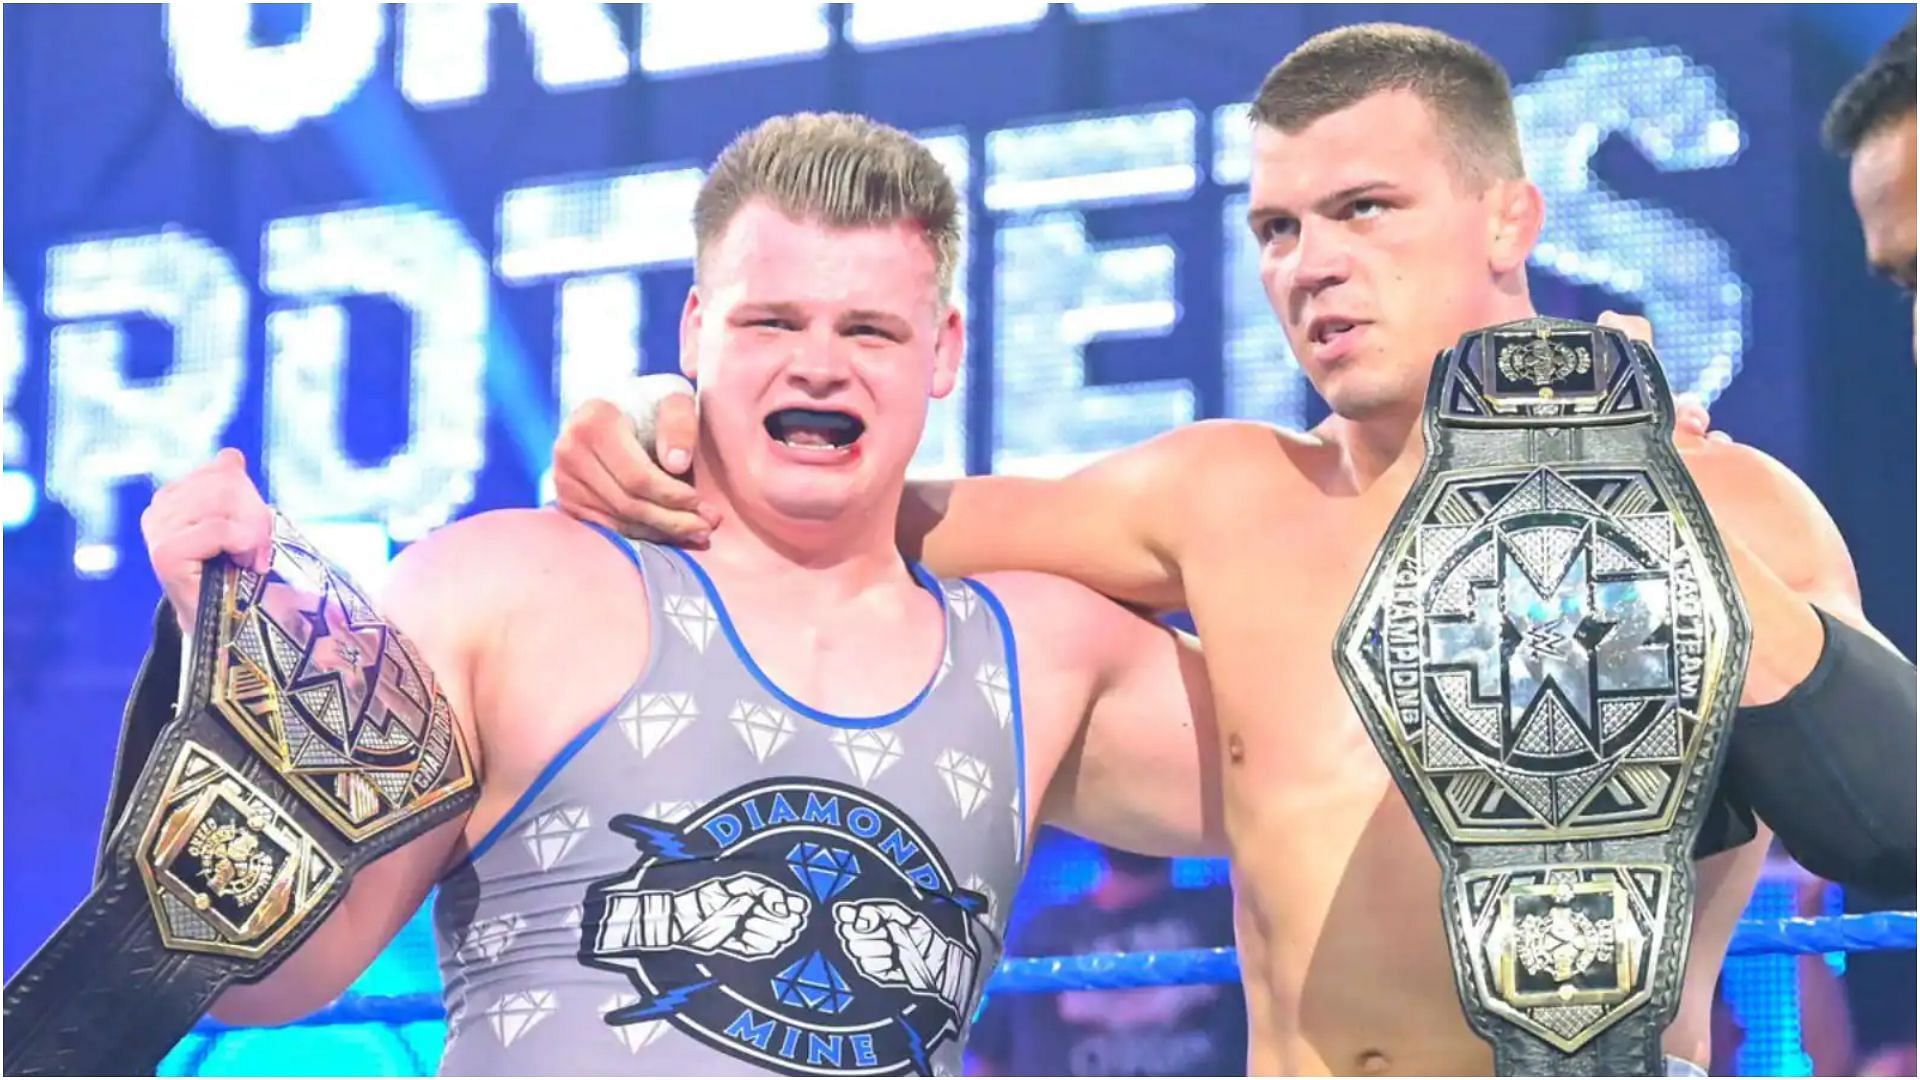 Are the Creeds WWE&#039;s next great sibling tag team?